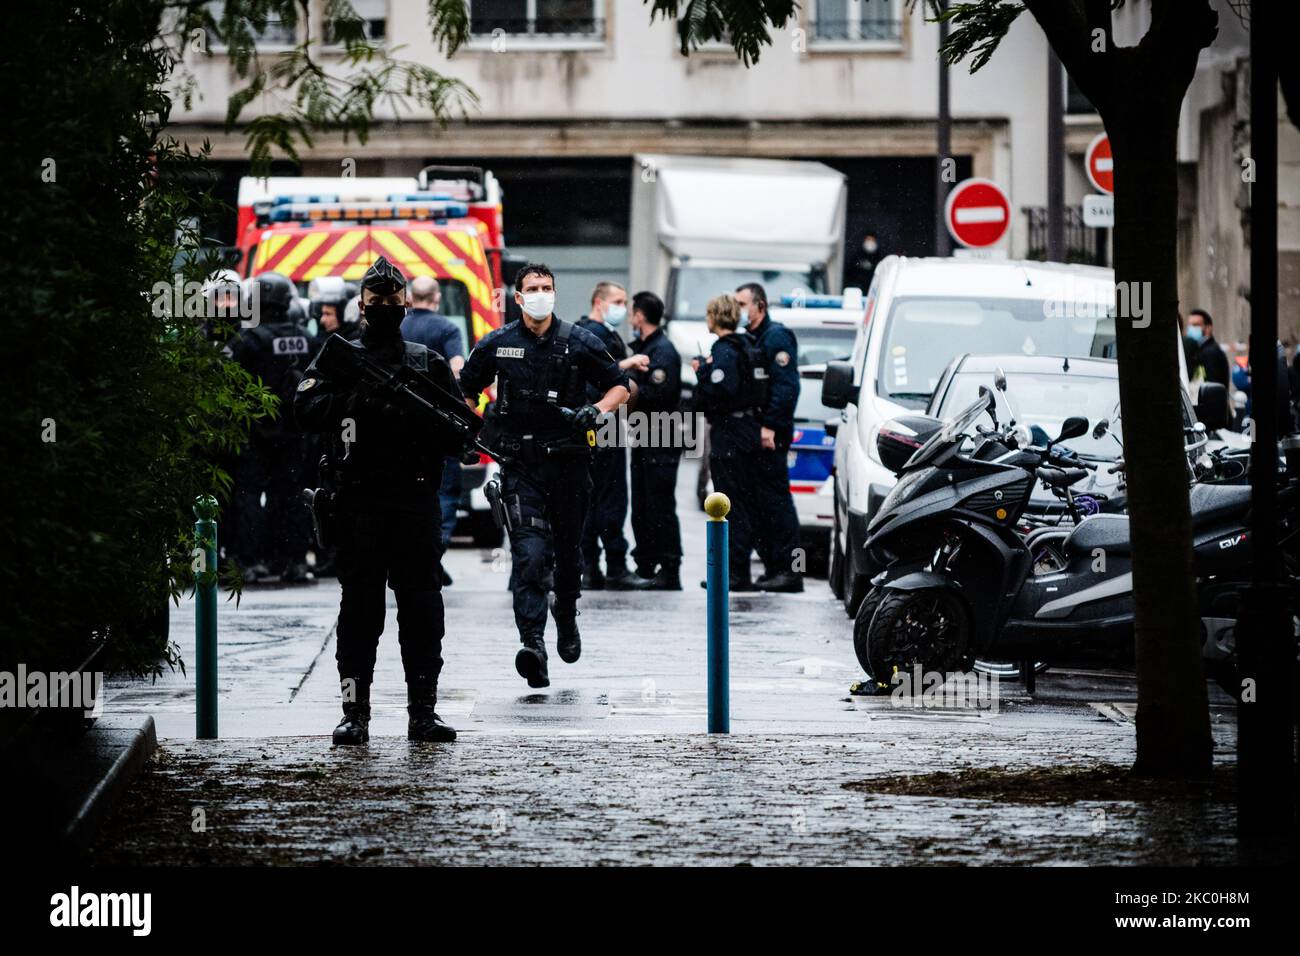 This Friday, September 25, 2020, shortly before noon, a man armed with a knife or a machete attacked people in the rue Nicolas Appart in the 11th arrondissement of Paris, where the former premises of the newspaper Charlie Hebdo are located and where the attacks of January 7, 2015 against the editorial staff took place, causing 2 injuries. The perpetrator of the attack was arrested along with a second man, and a security perimeter was immediately established in the nearby streets. The investigation was referred to the National Anti-Terrorist Prosecutor's Office. (Photo by Samuel Boivin/NurPhoto Stock Photo